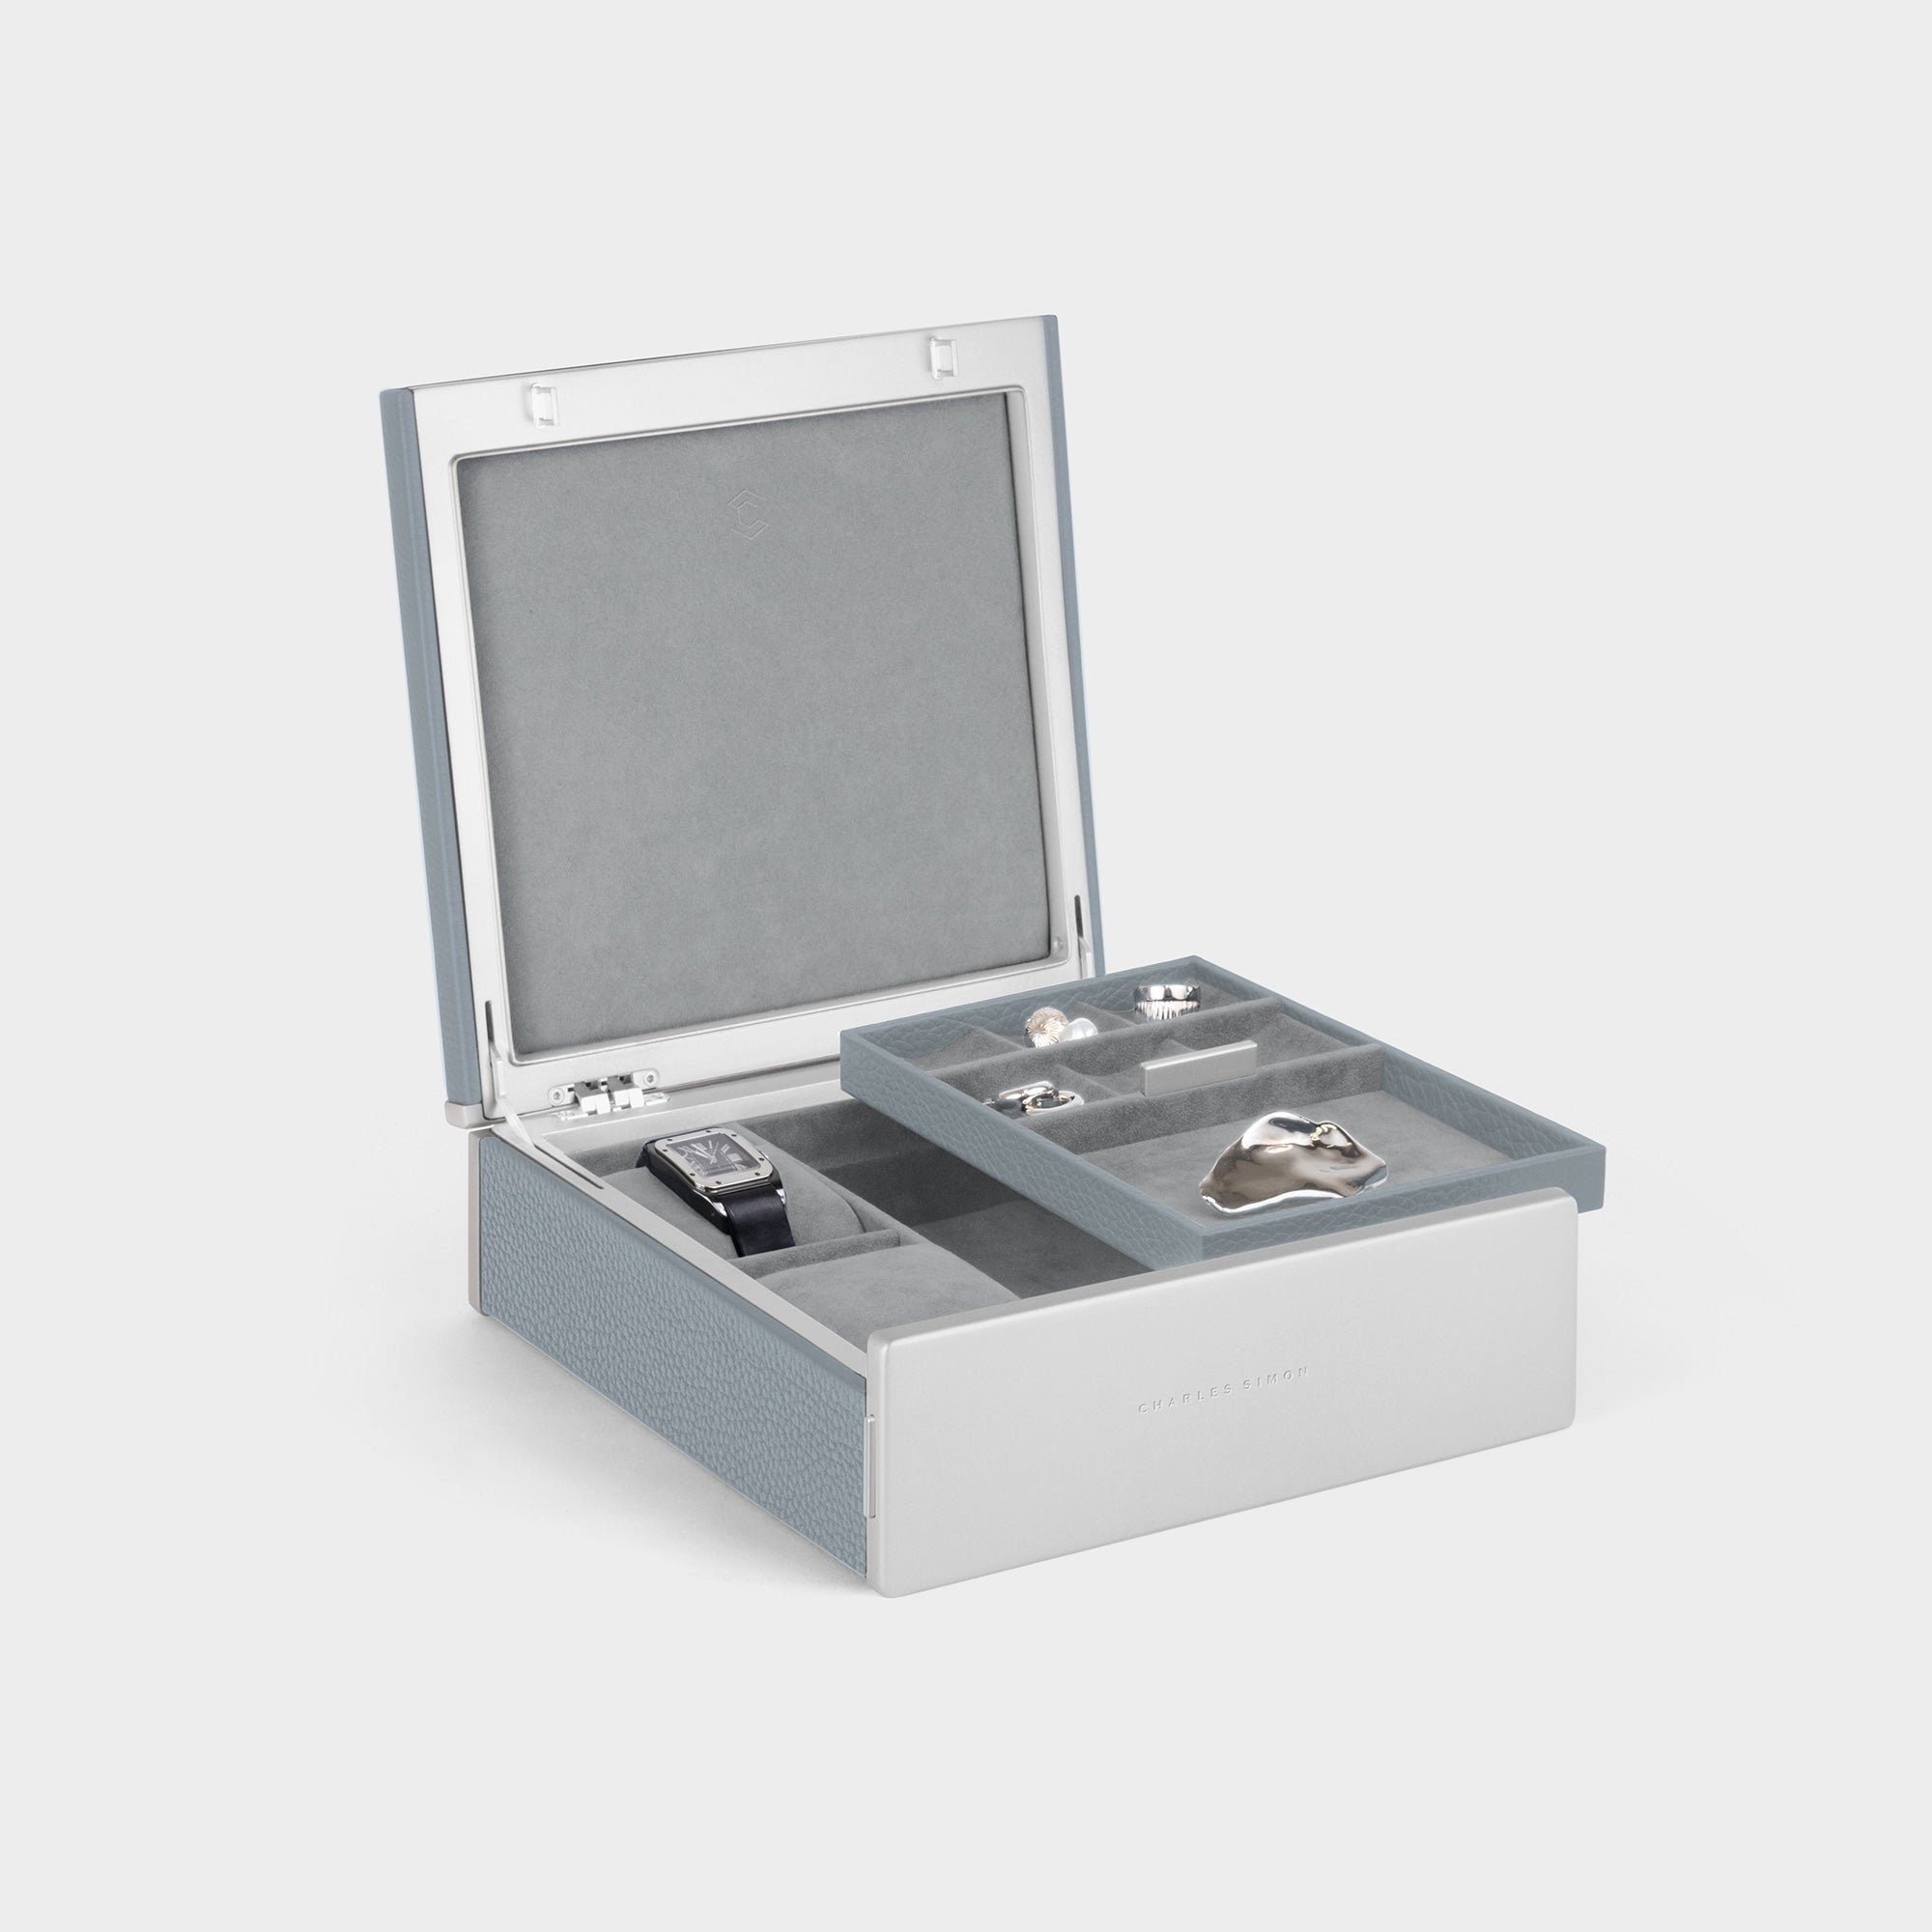 Product photo of open Taylor 2 Watch box in cloud grey leather and fog grey interior showcasing the boxe's removable jewelry tray for stylish and convenient jewelry organization and storage